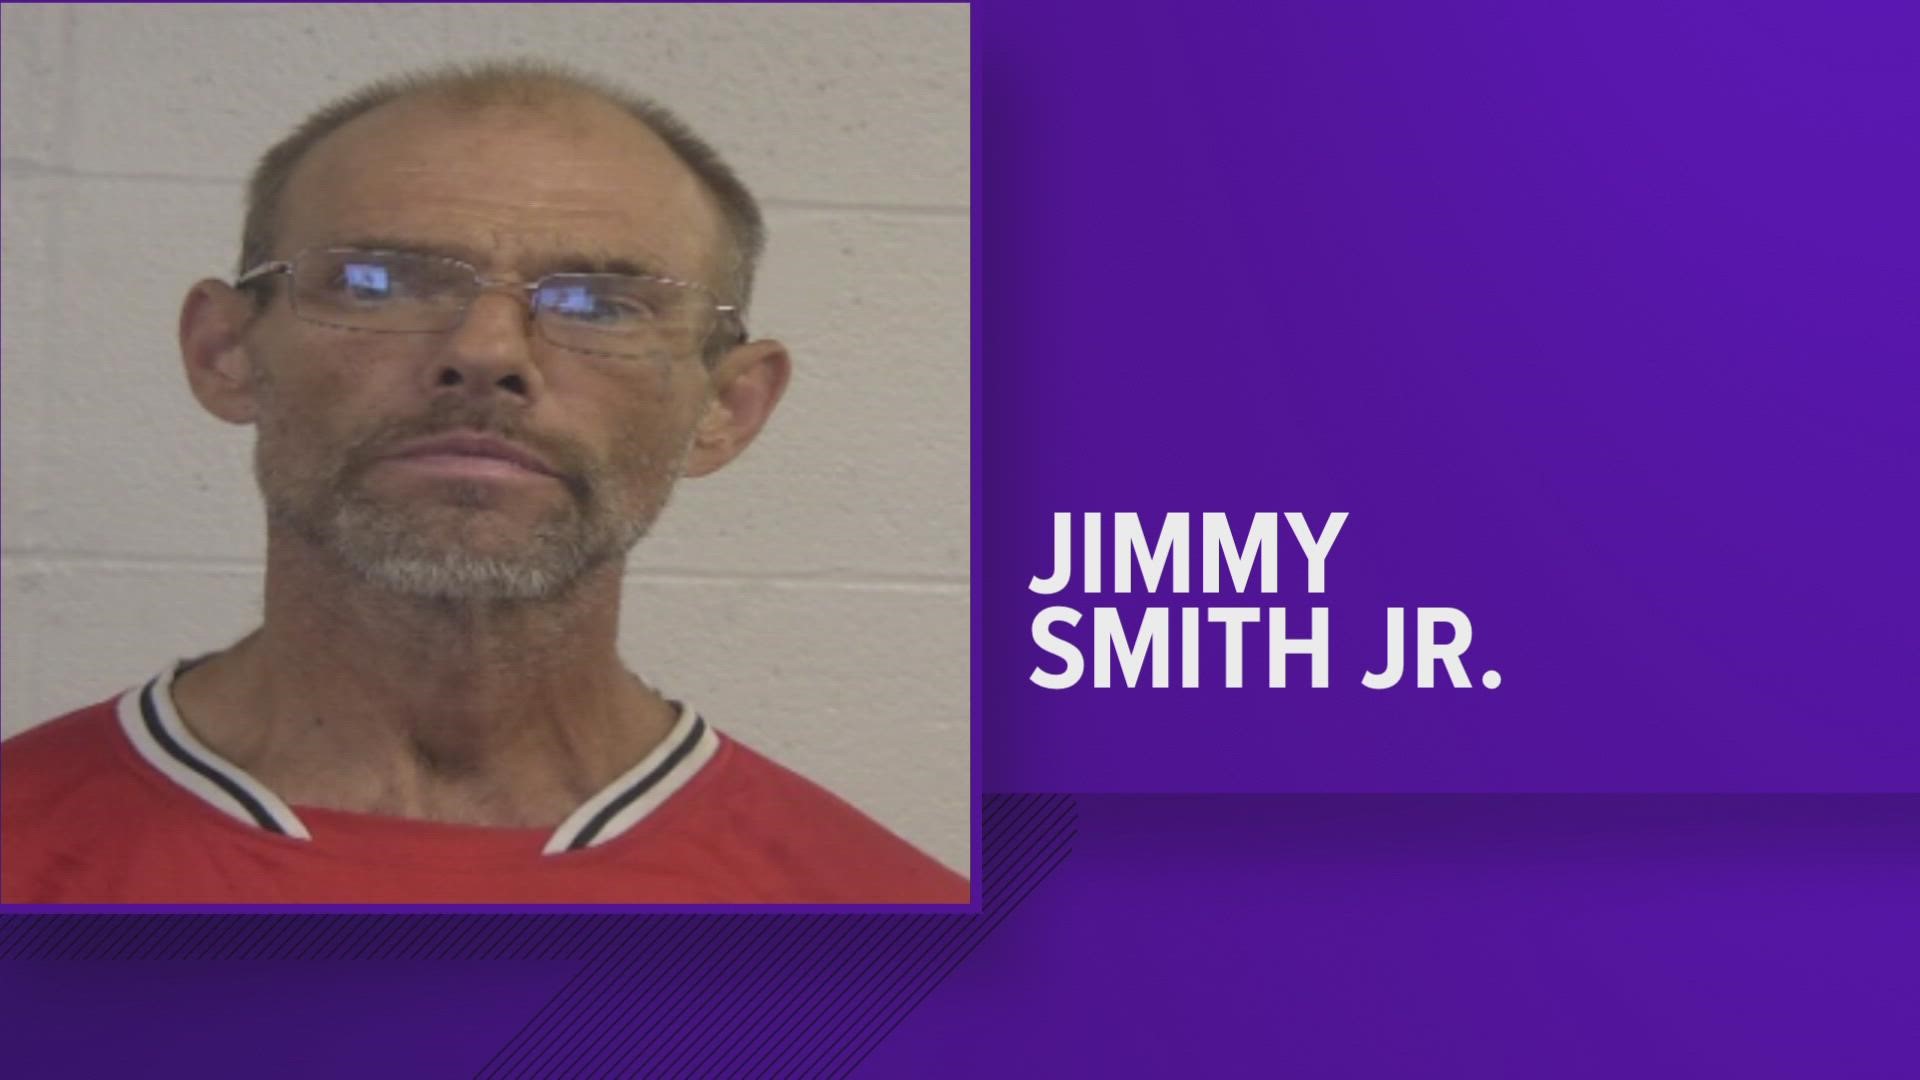 Jimmy Smith Jr. was arrested after forensic evidence linked him to the hoax device left at a TARC bus stop on 5th and Jefferson Street.